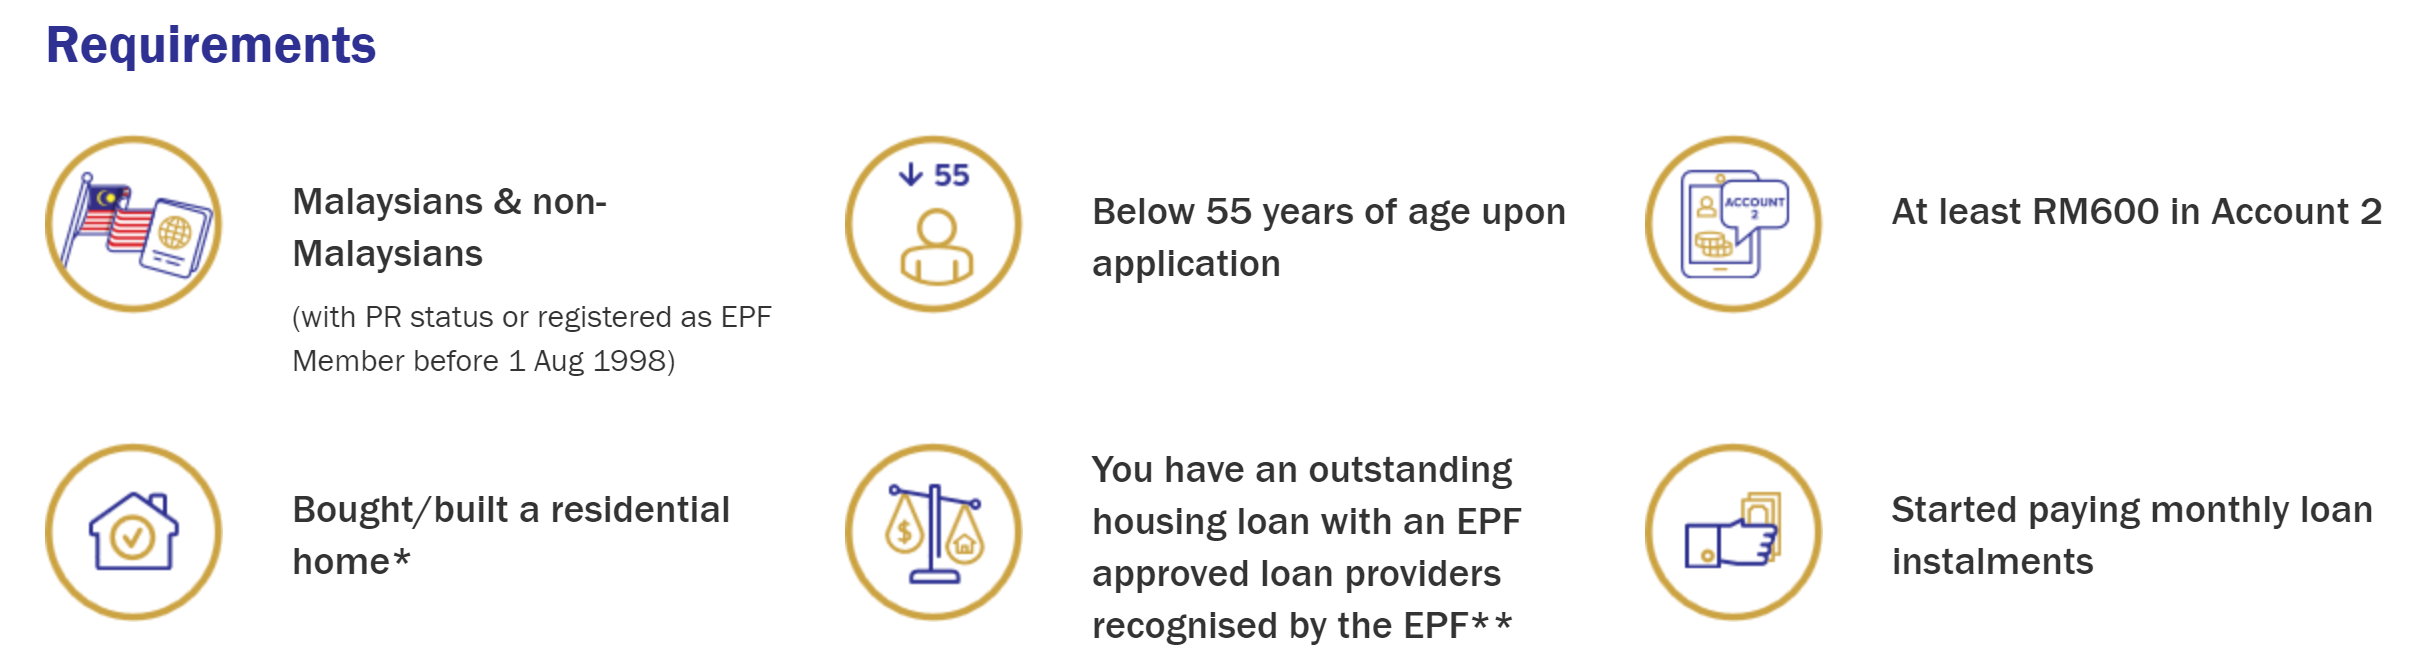 How Epf Can Reduce Your Home Loan Principal Or Monthly Installment Part 1 Black Belt Millionaire